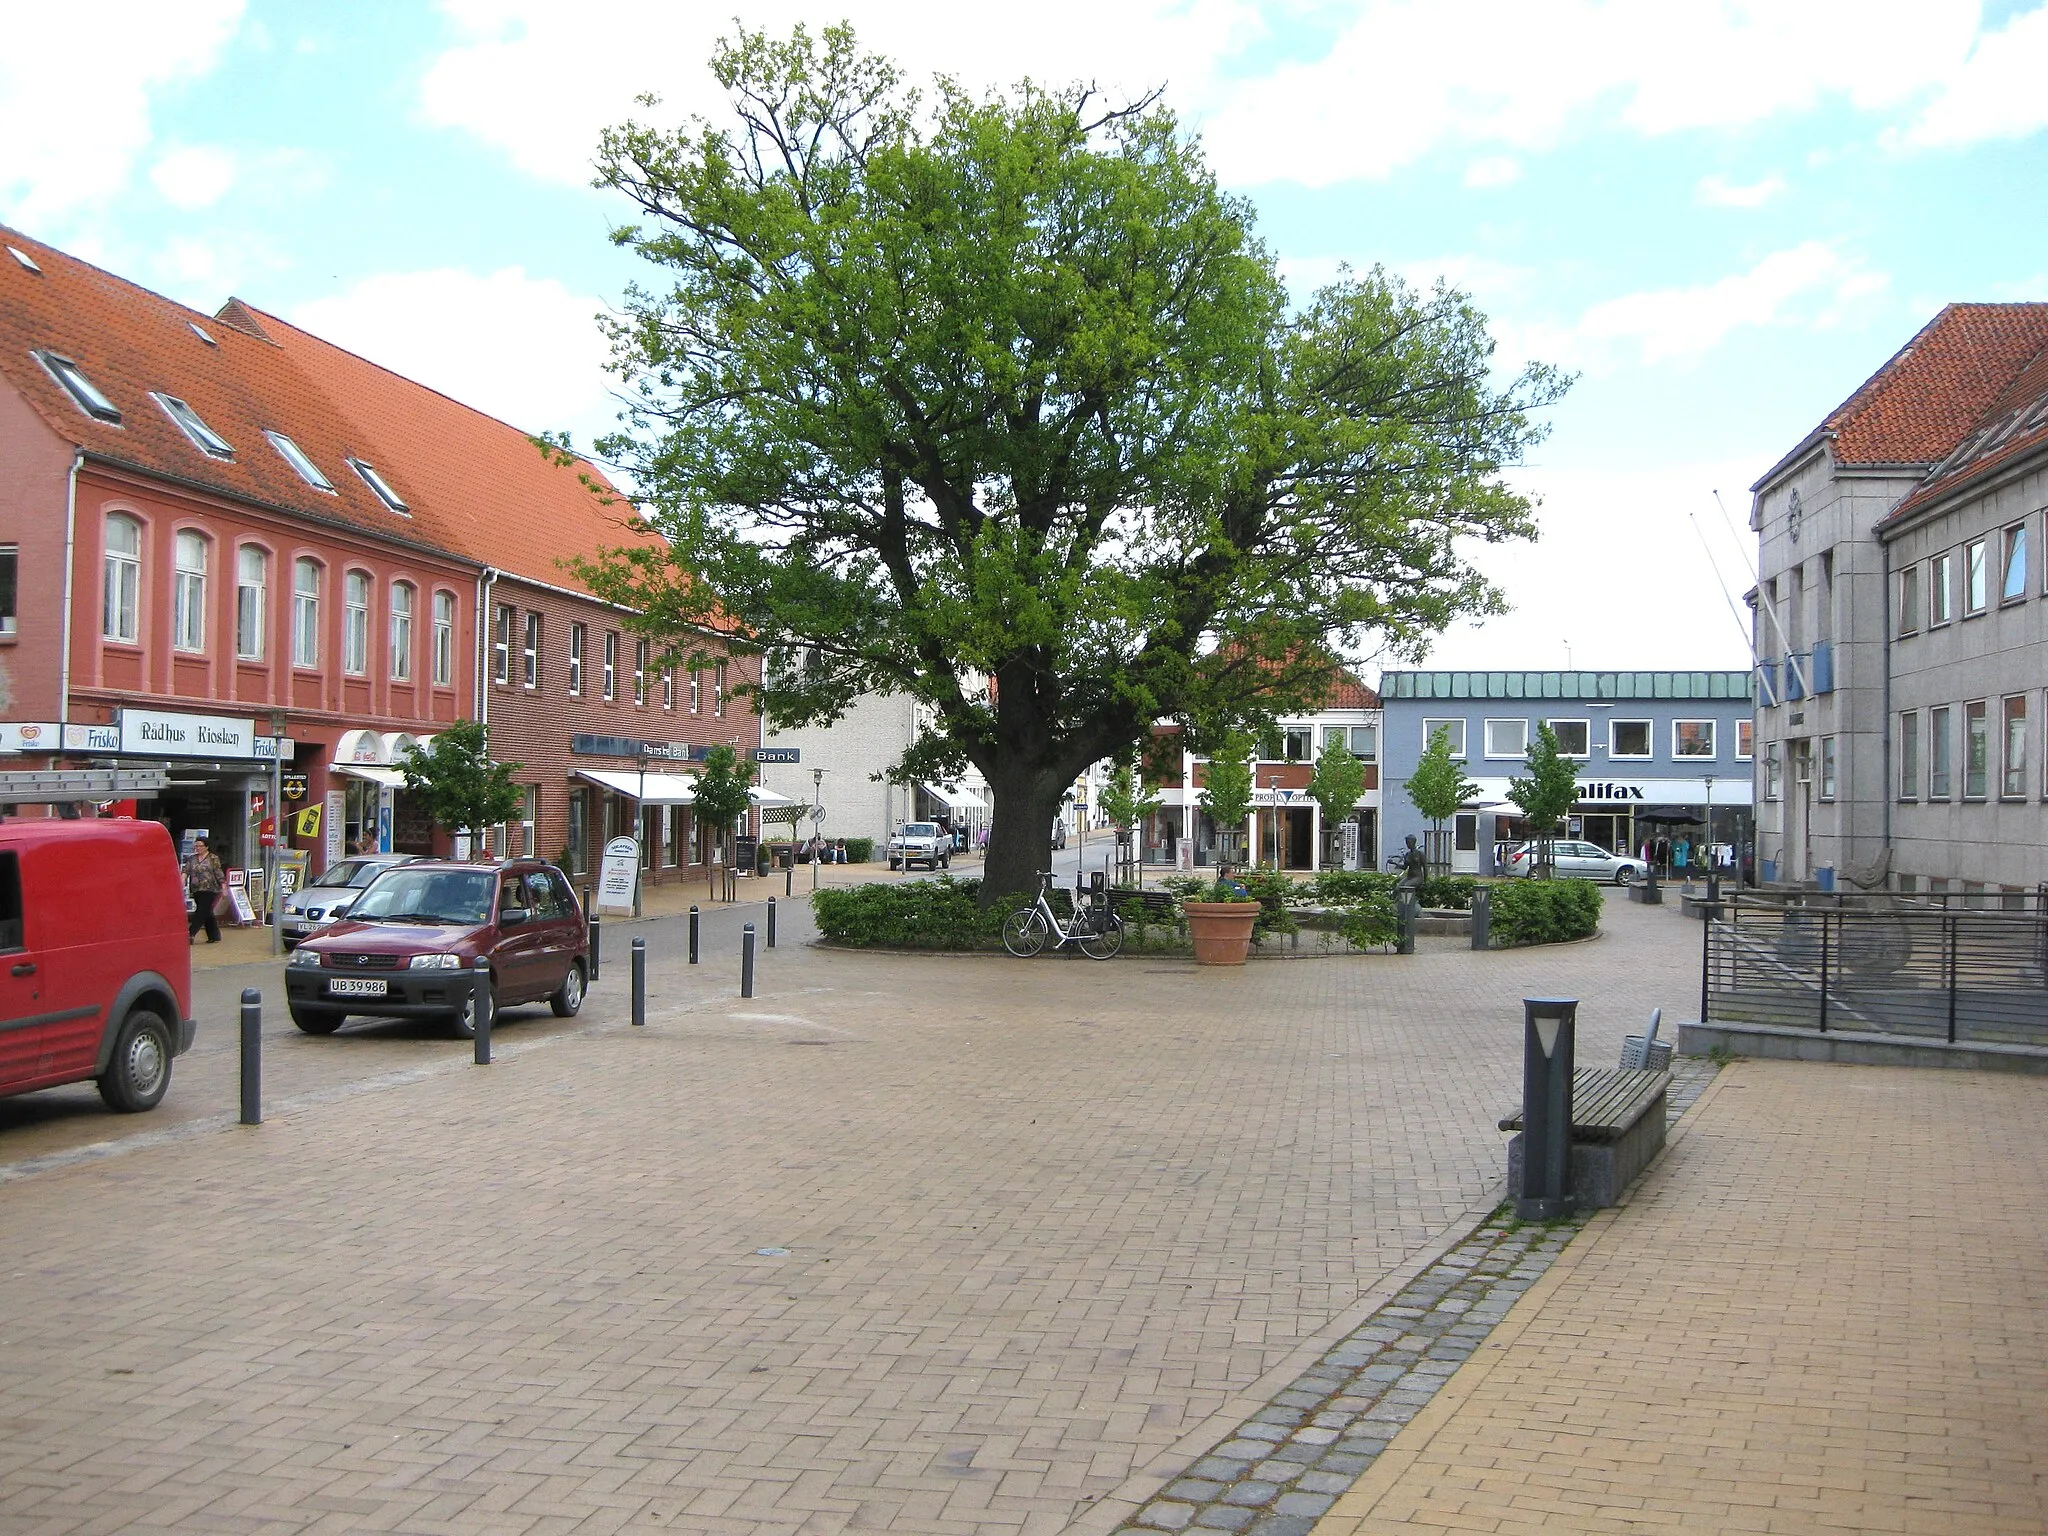 Photo showing: The central square of the small town "Gråsten". The town is located in Southern Jutland, Denmark.